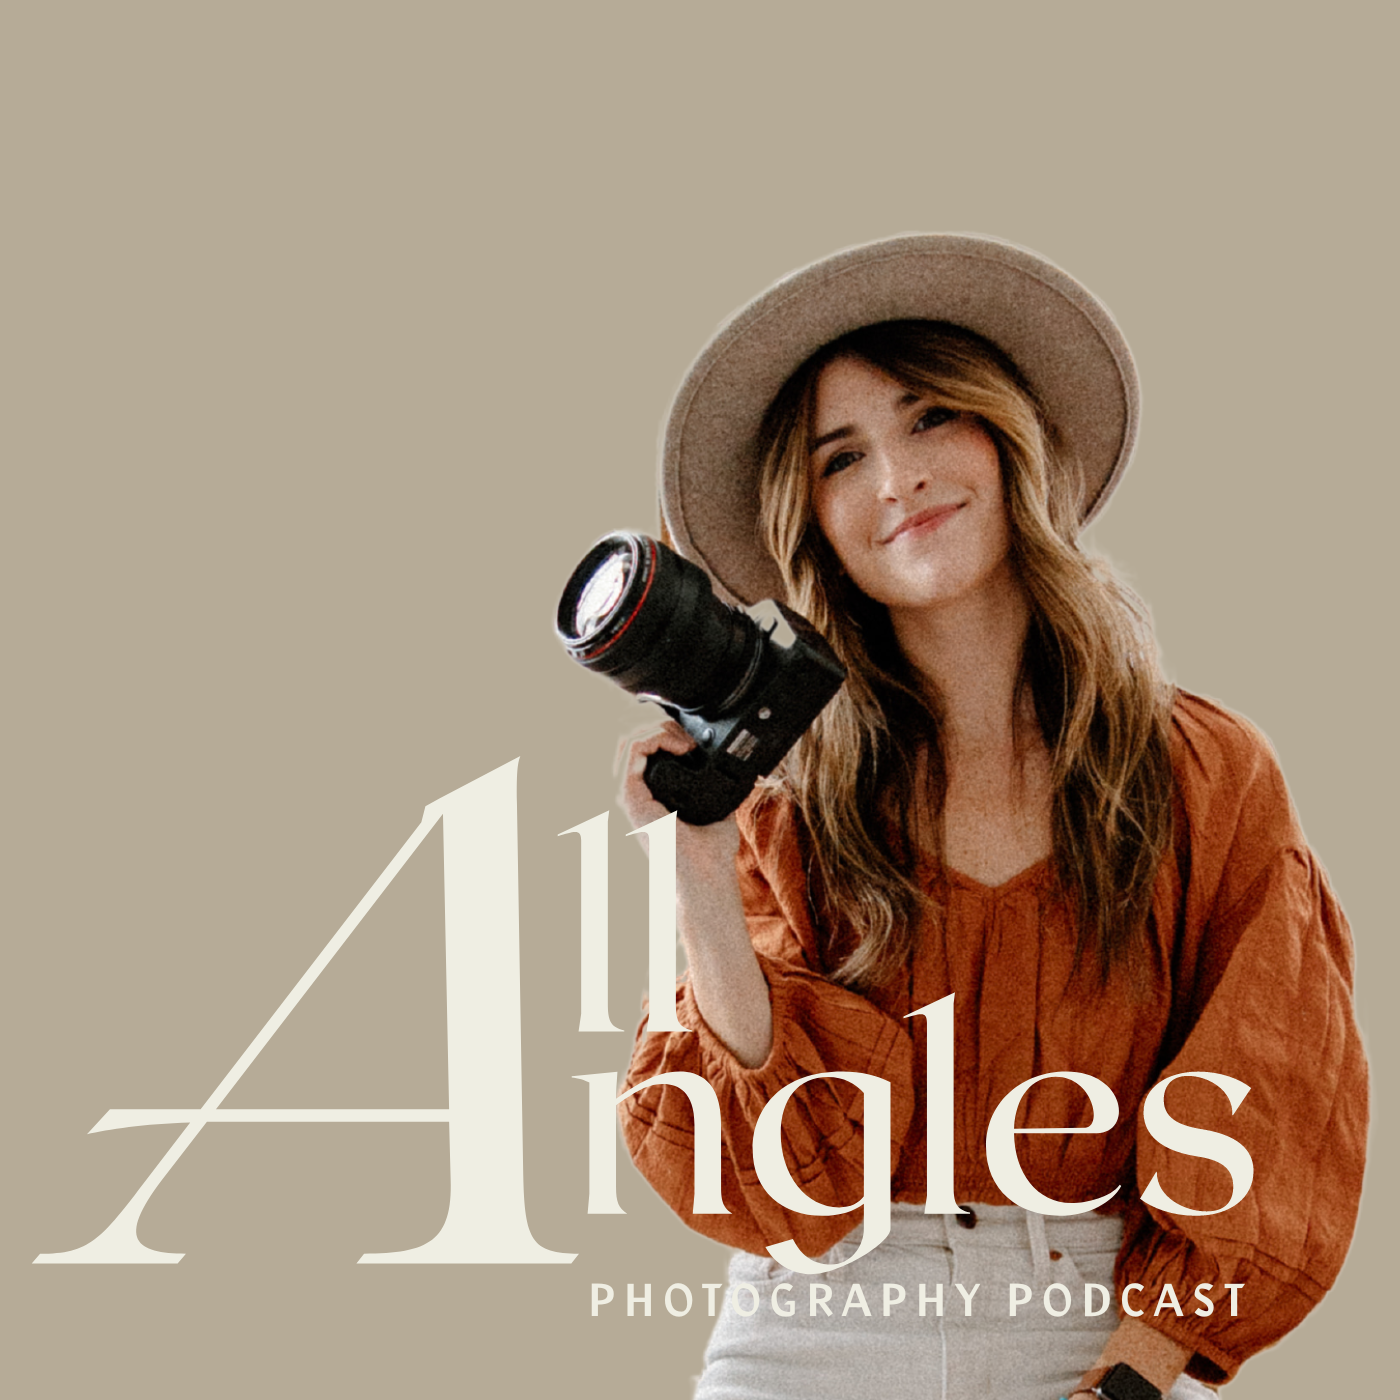 All Angles Photography Podcast